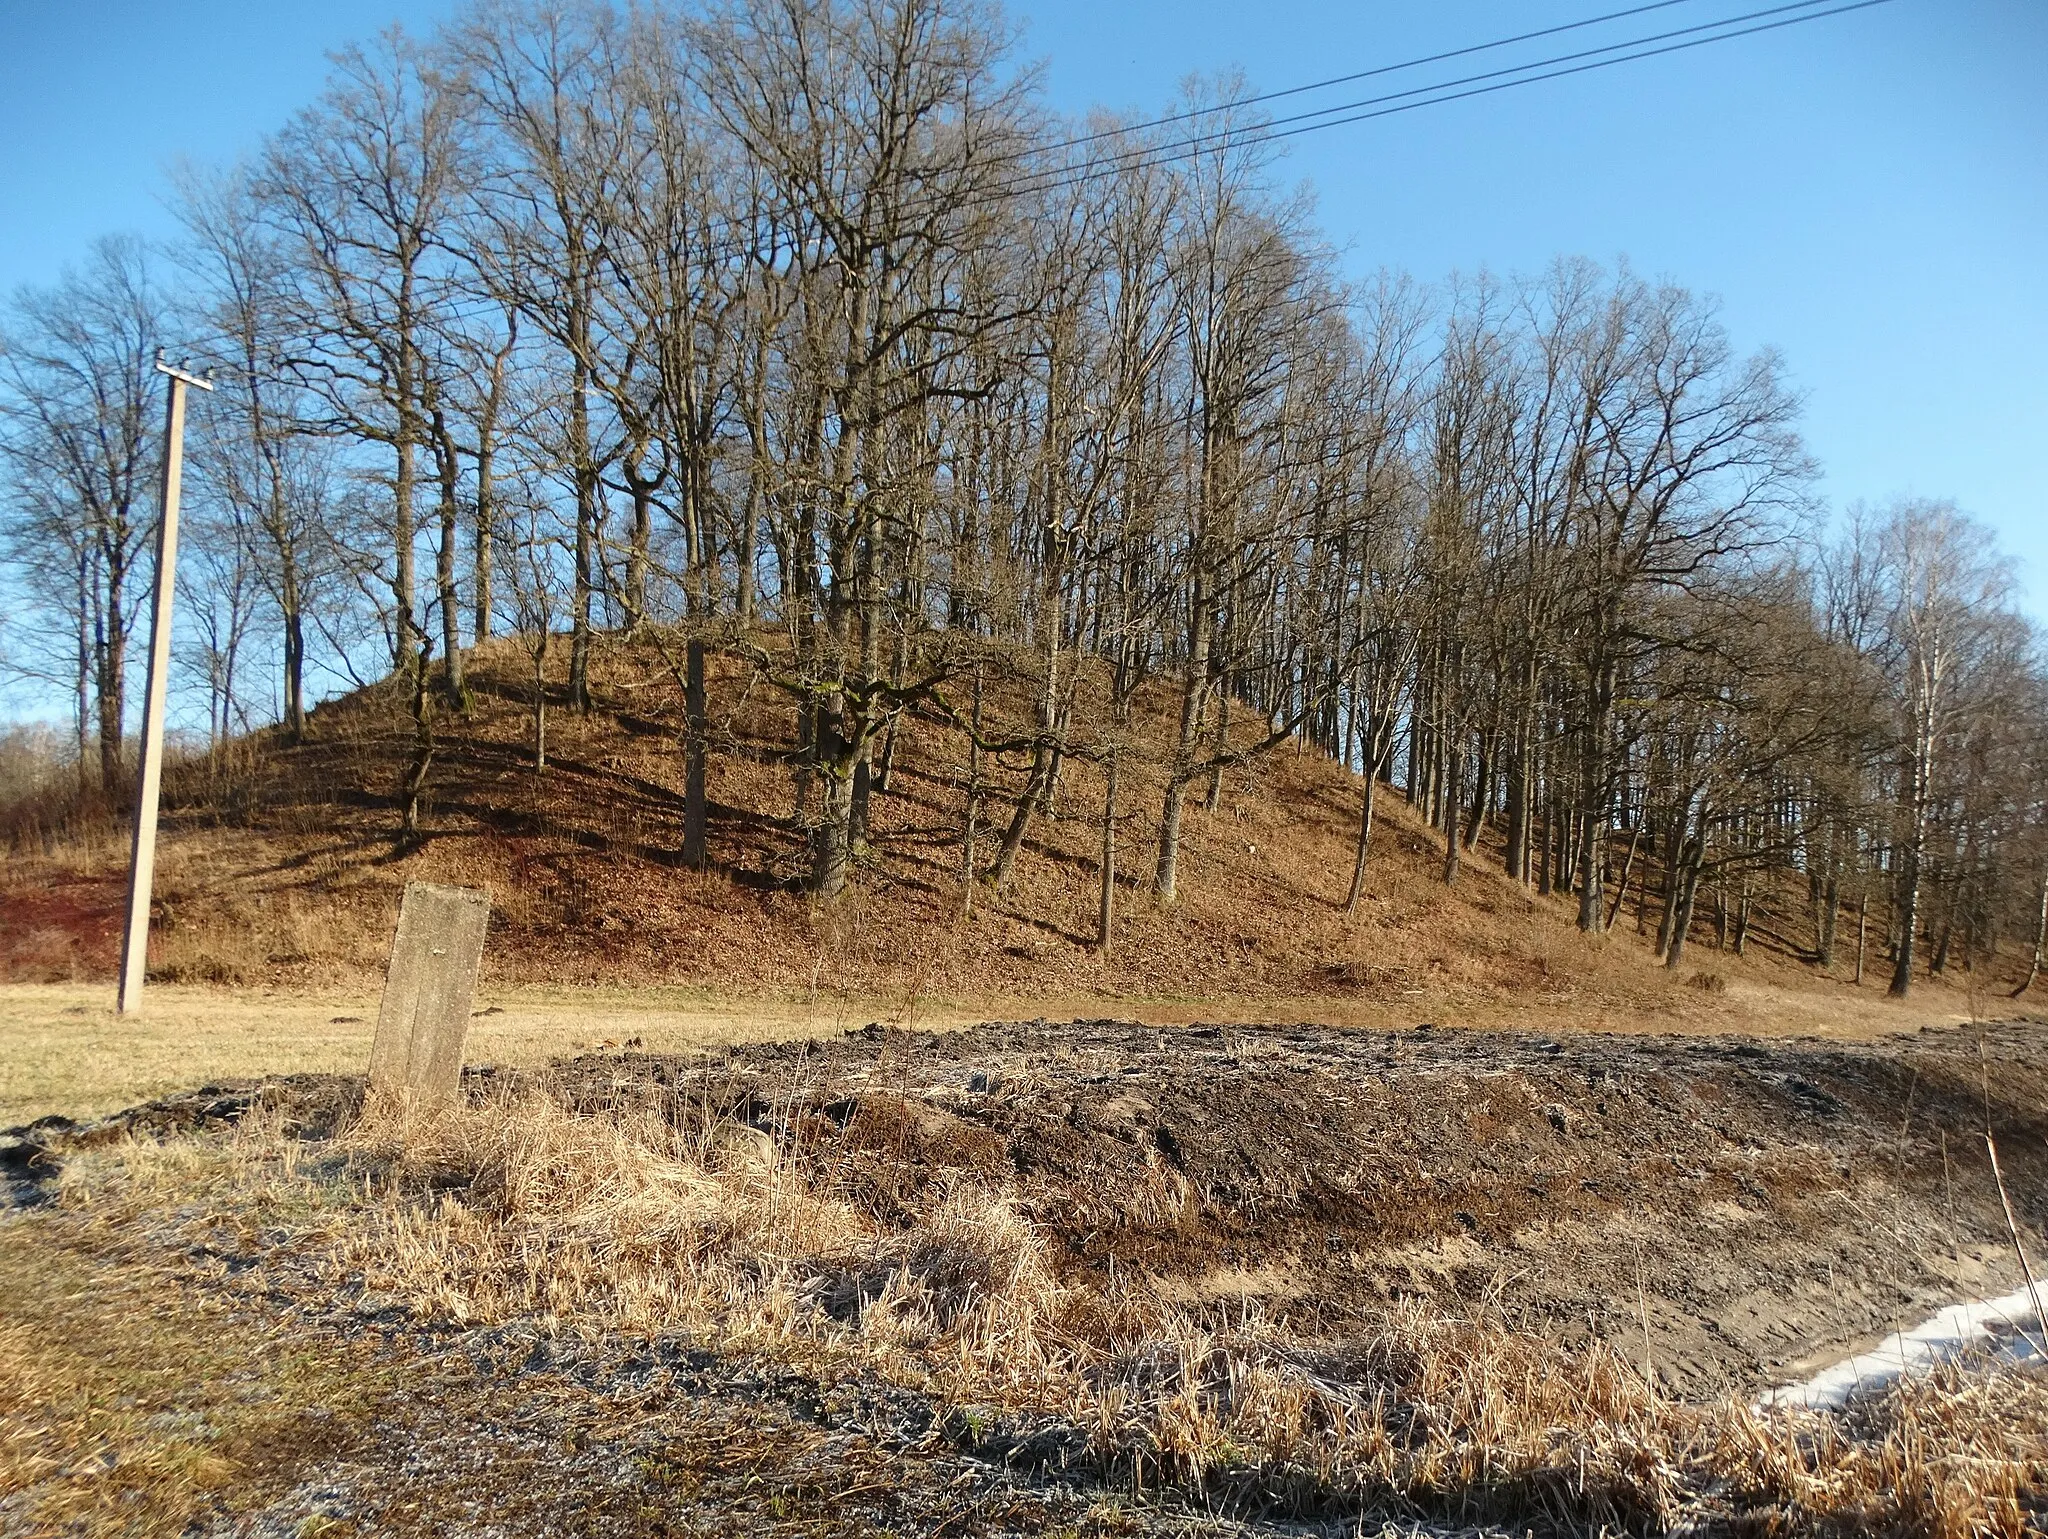 Photo showing: Nausodis II hillfort (Varkaliai hillforts), Plungė district, Lithuania